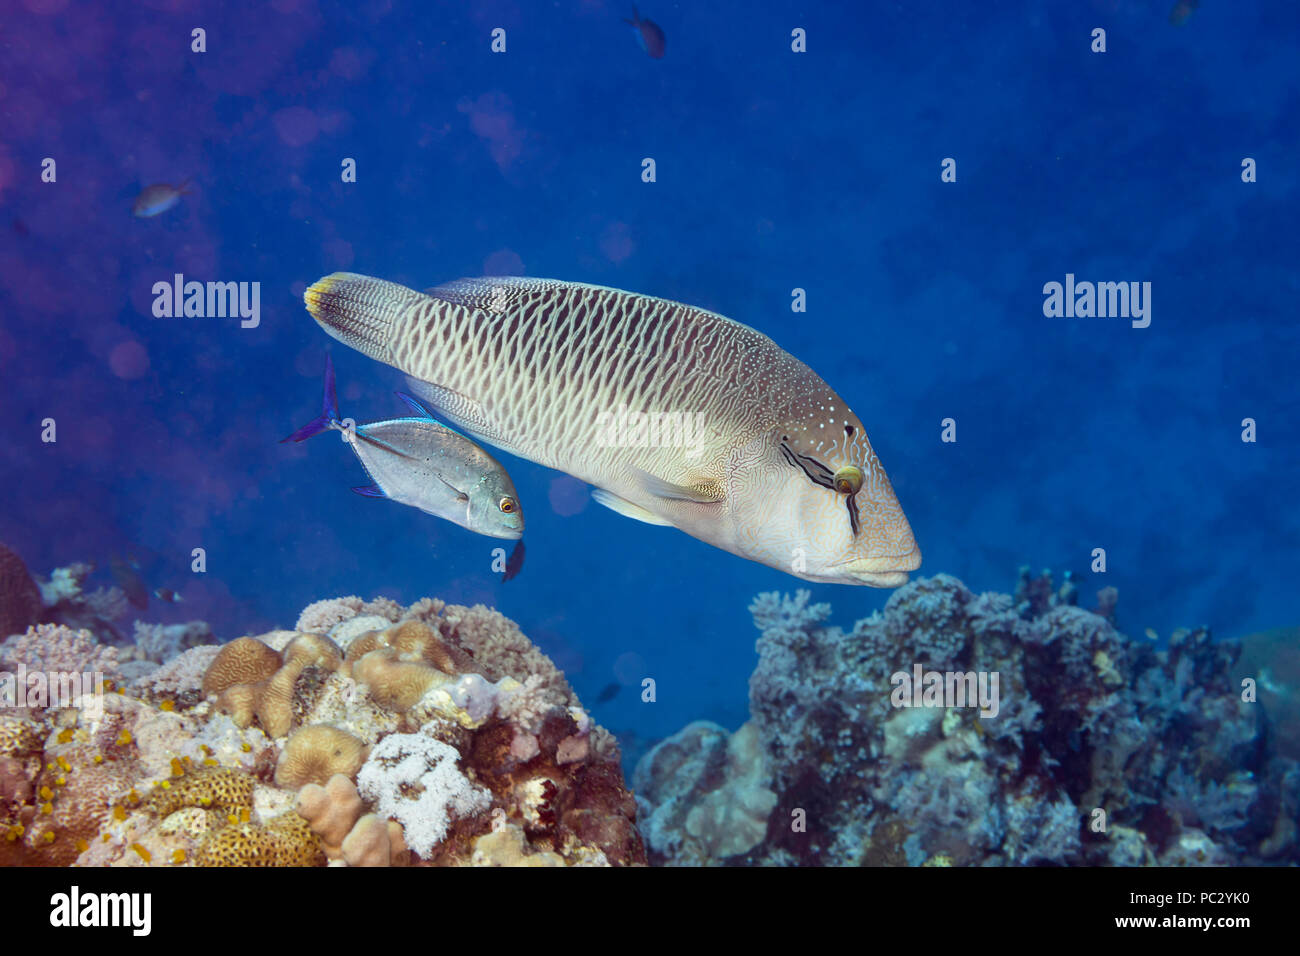 This bluefin trevally or jack, Caranx melampygus, and juvenile humphead or Napoleon wrasse, Cheilinus undulatus, are hunting together cooperatively. T Stock Photo